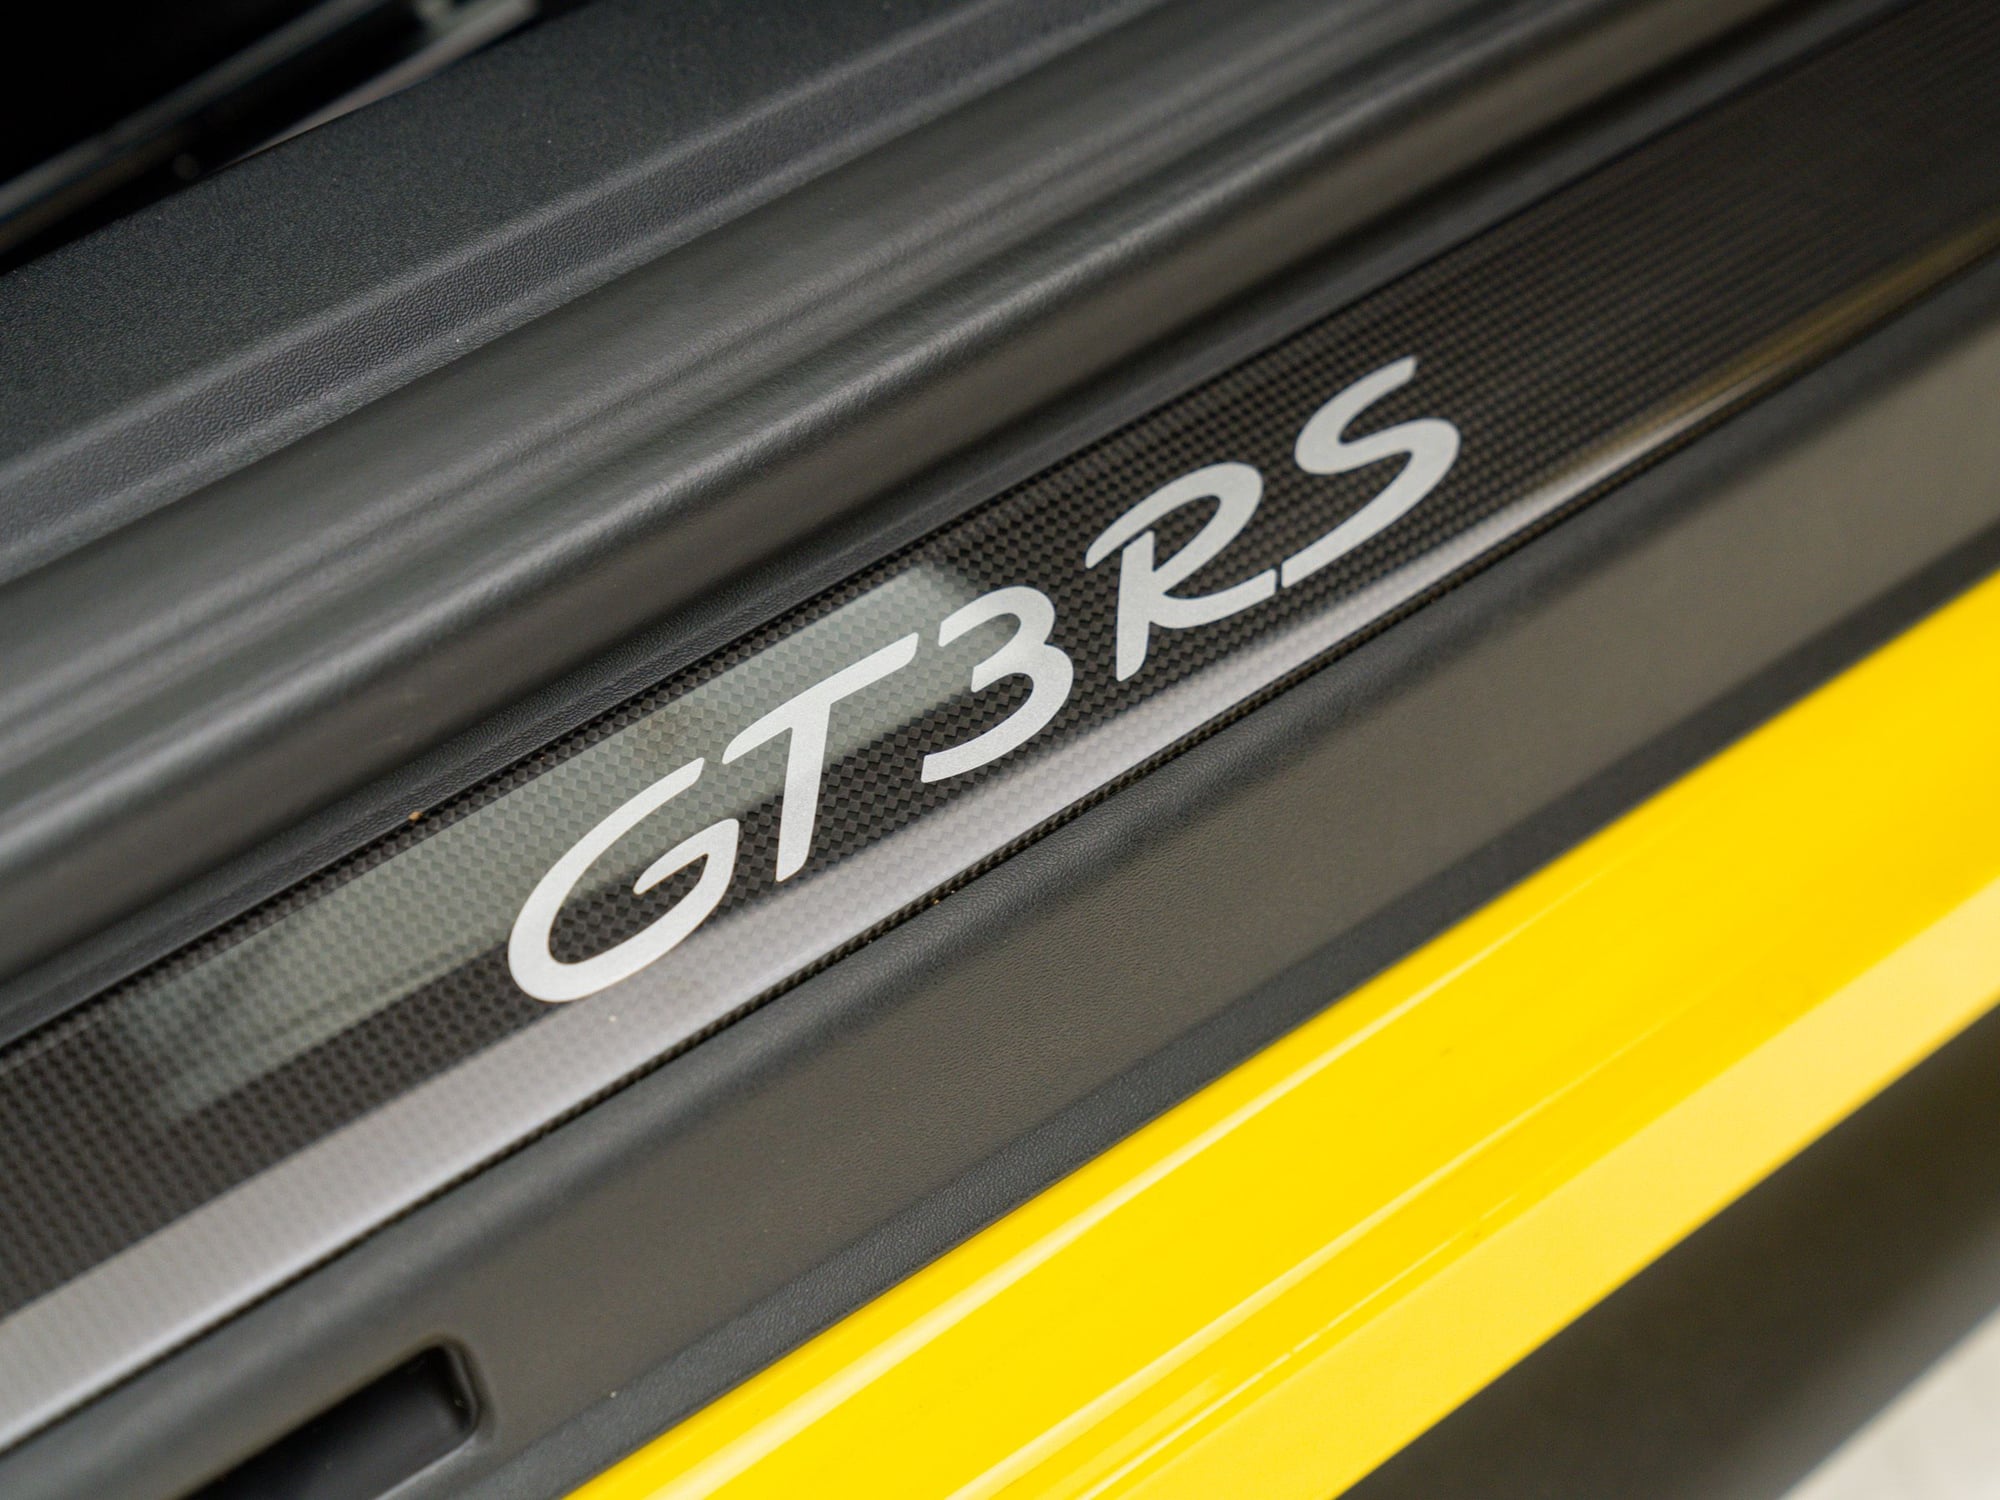 2019 Porsche GT3 - Dealer Inventory: Certified Pre-Owned 2019 Porsche 911 GT3 RS - Used - VIN WP0AF2A94KS165441 - 6,200 Miles - 6 cyl - 2WD - Automatic - Coupe - Yellow - Beaverton, OR 97005, United States